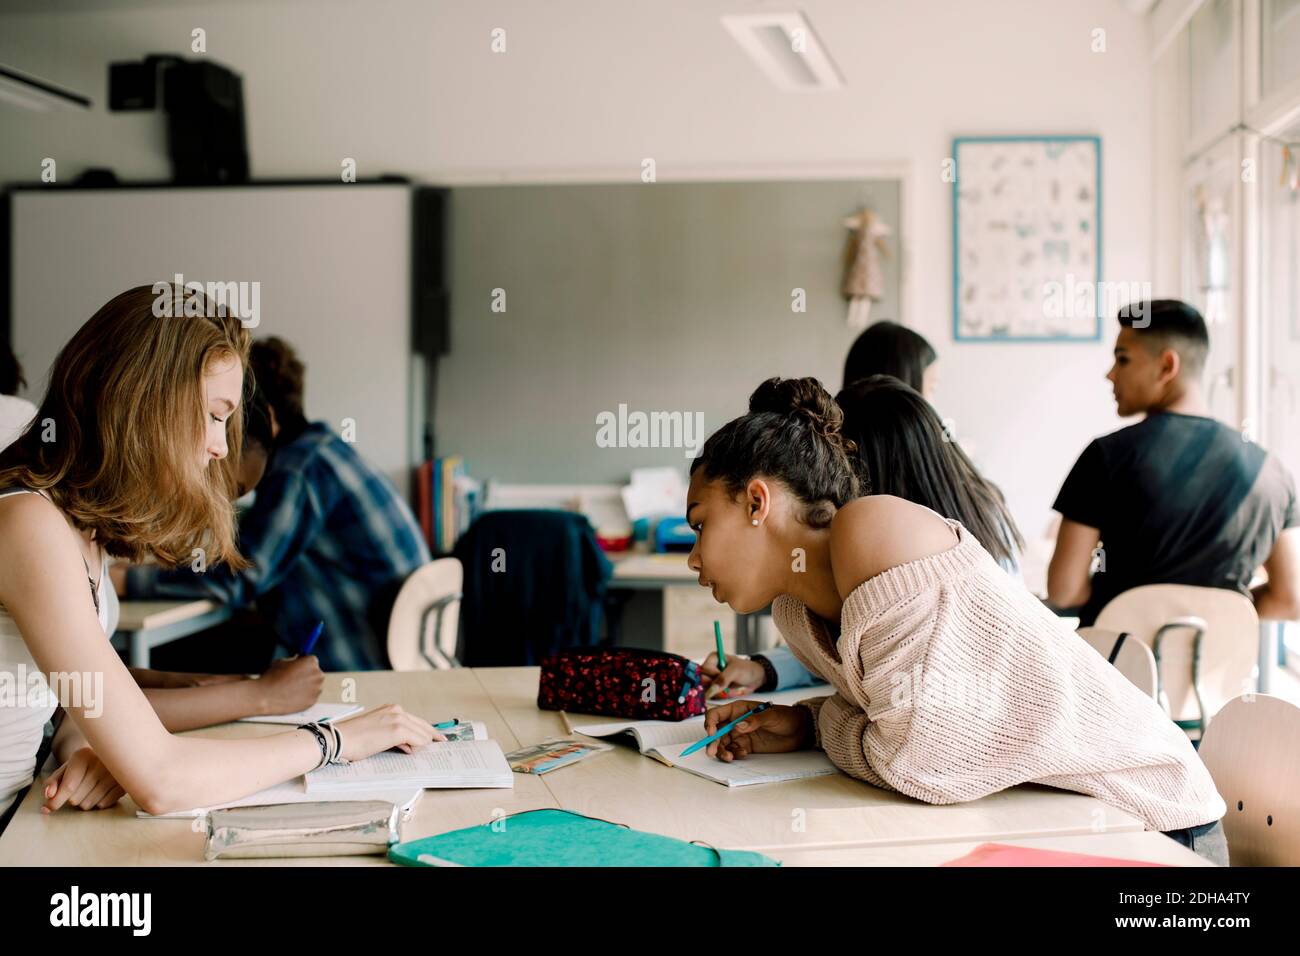 Teenage students discussing over book in classroom Stock Photo